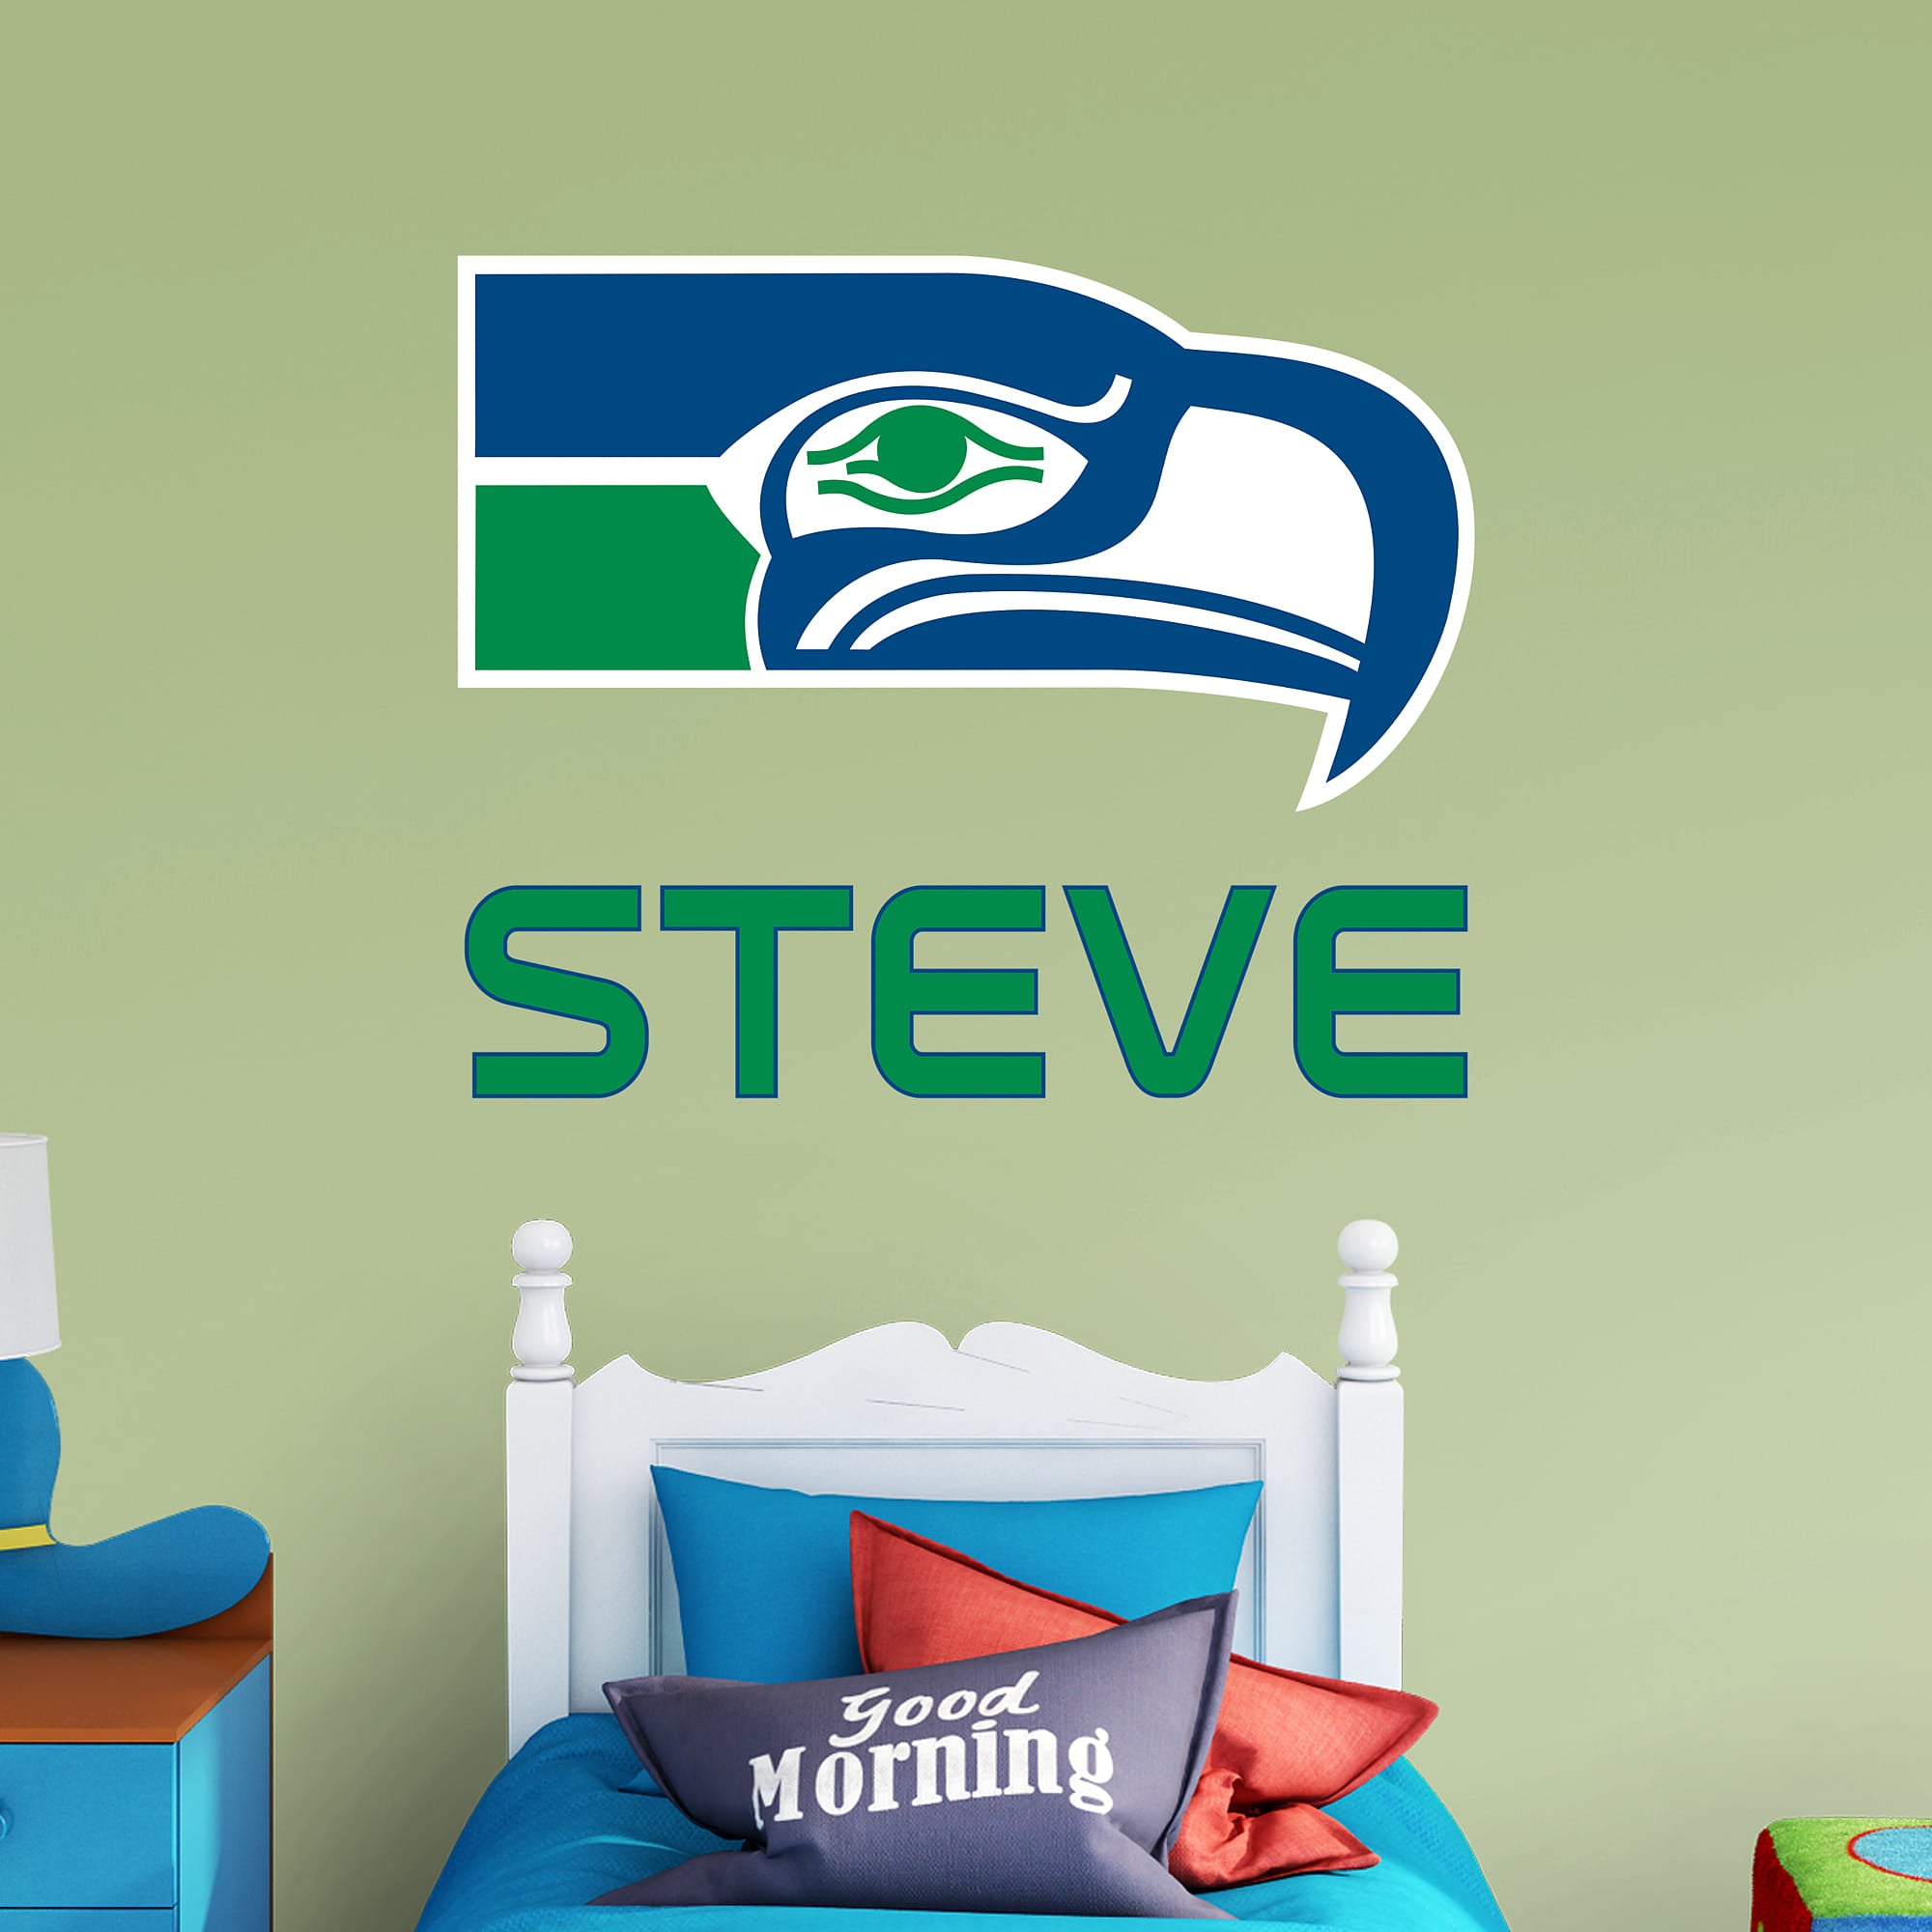 Seattle Seahawks: Classic Stacked Personalized Name - Officially Licensed NFL Transfer Decal in Green (52"W x 39.5"H) by Fathead